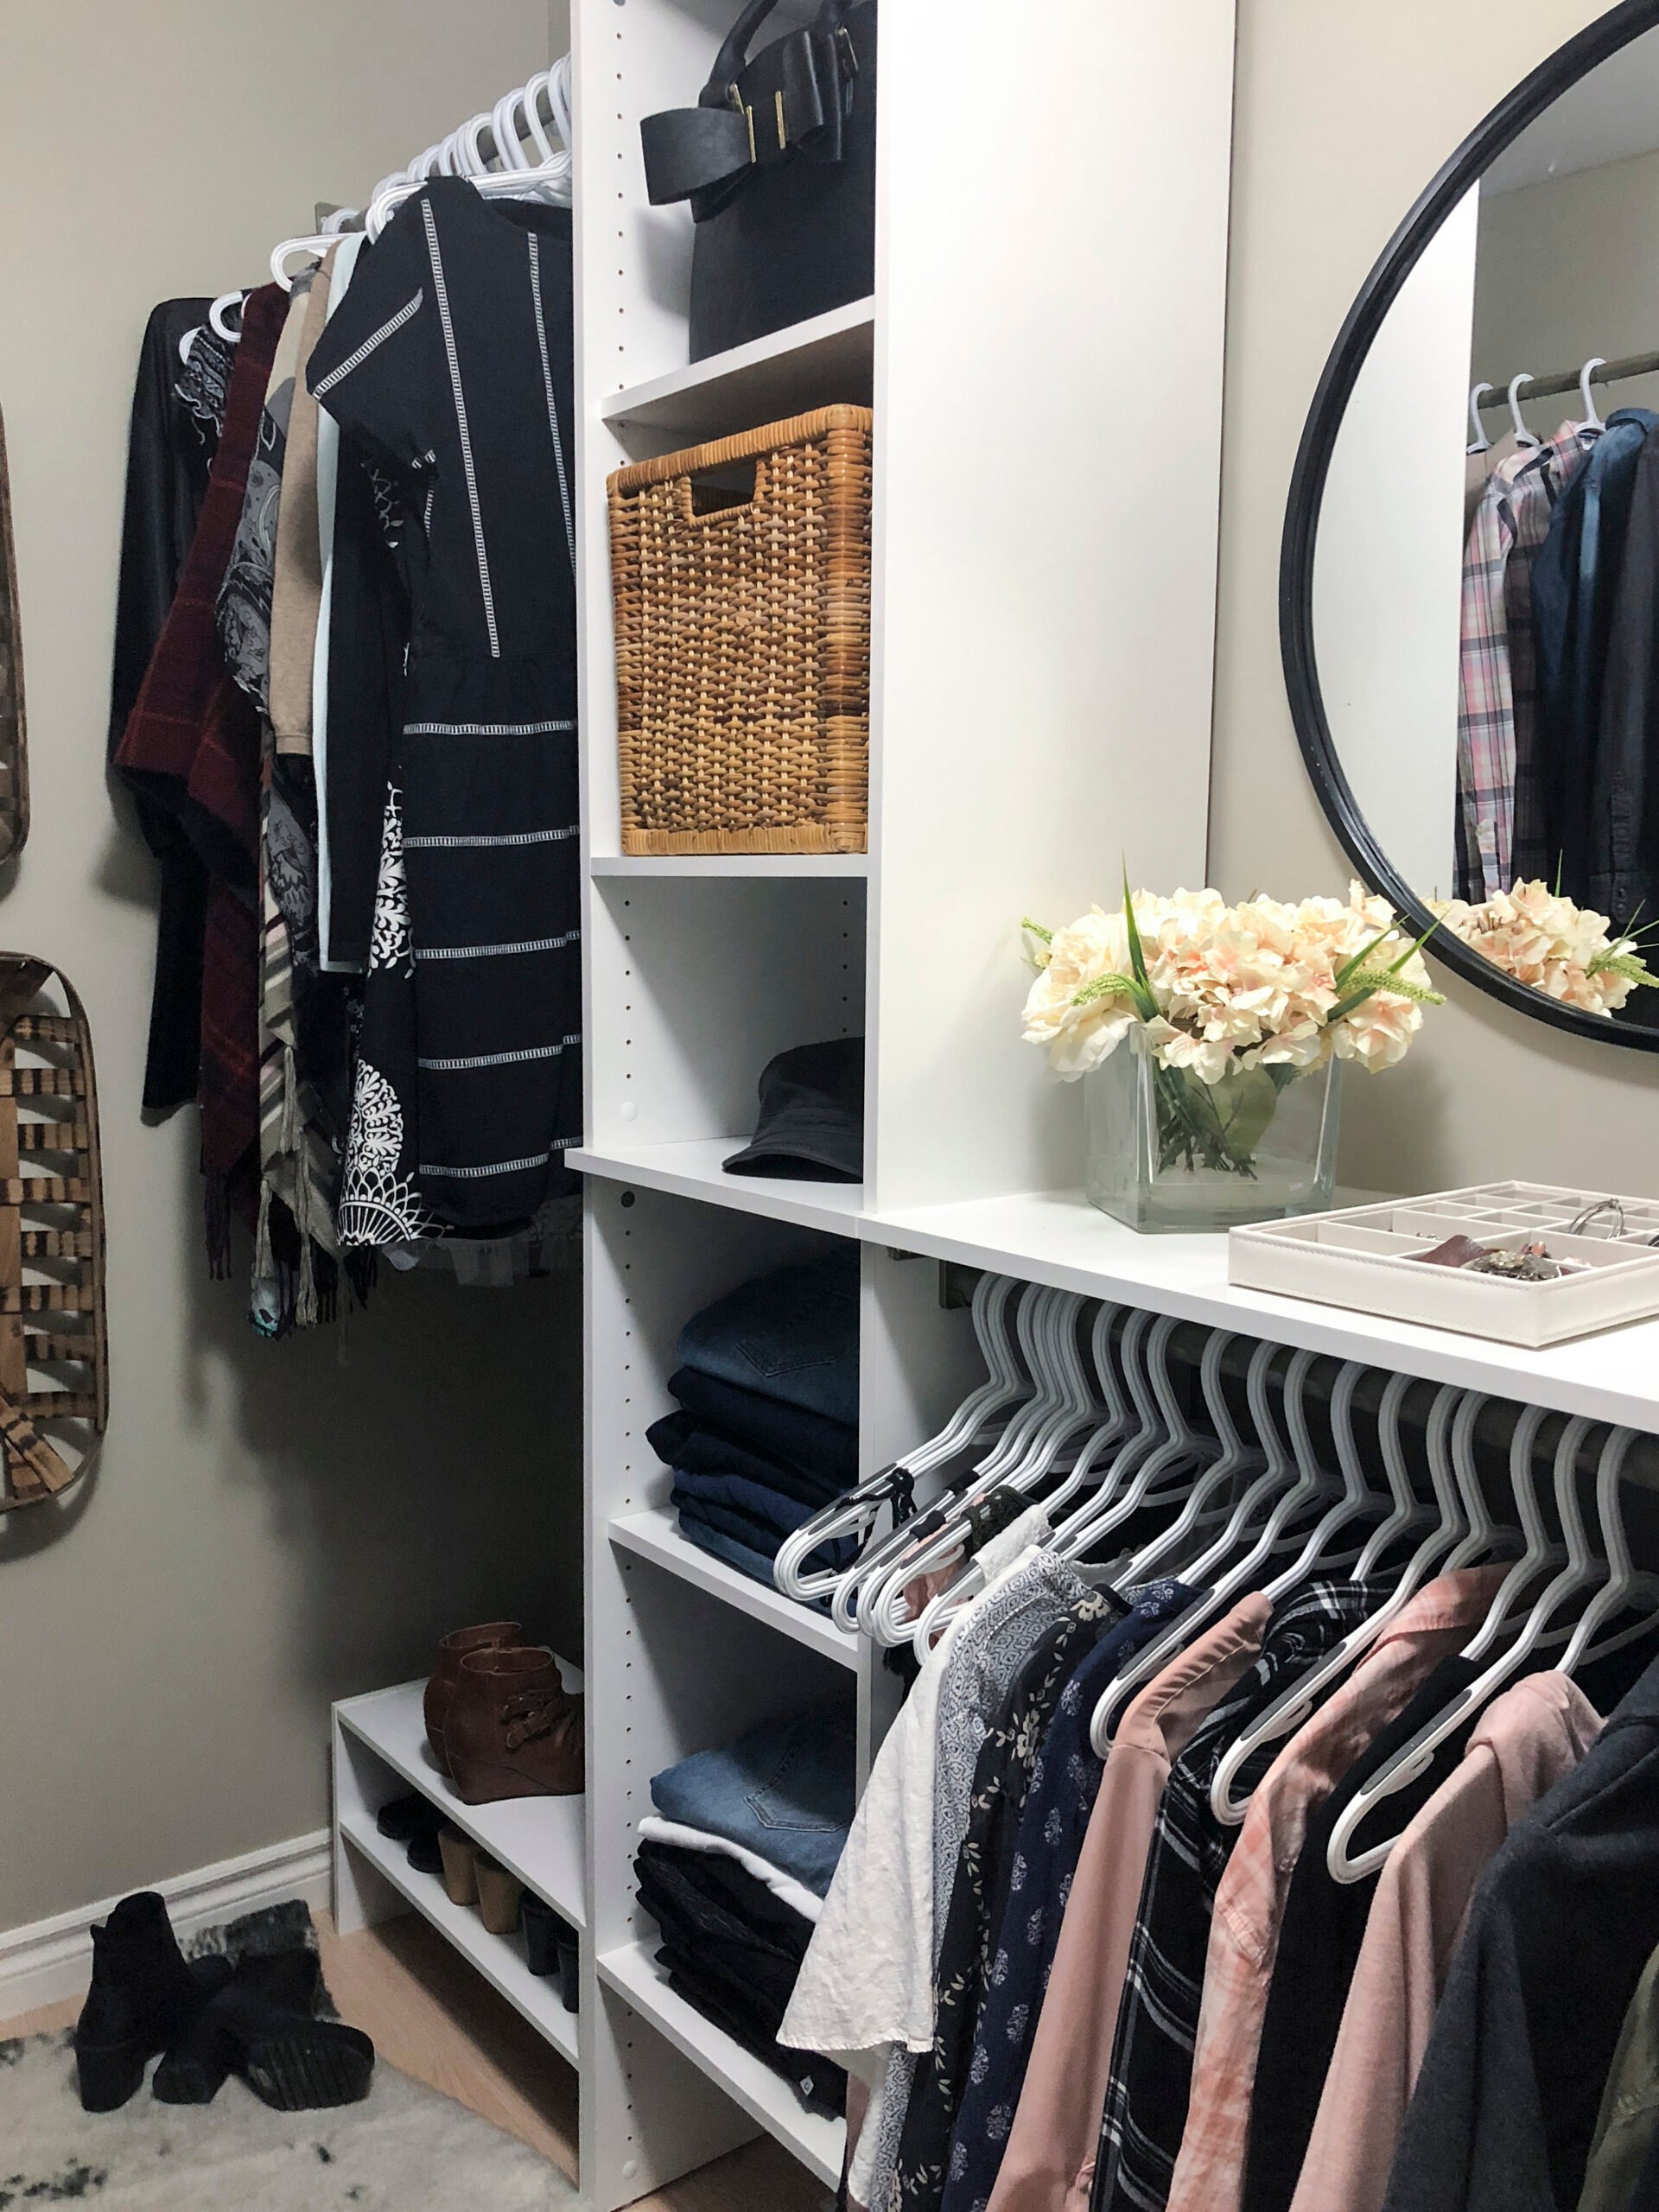 How I maintain a color-organized closet – 6 tips for Pinterest-perfect storage